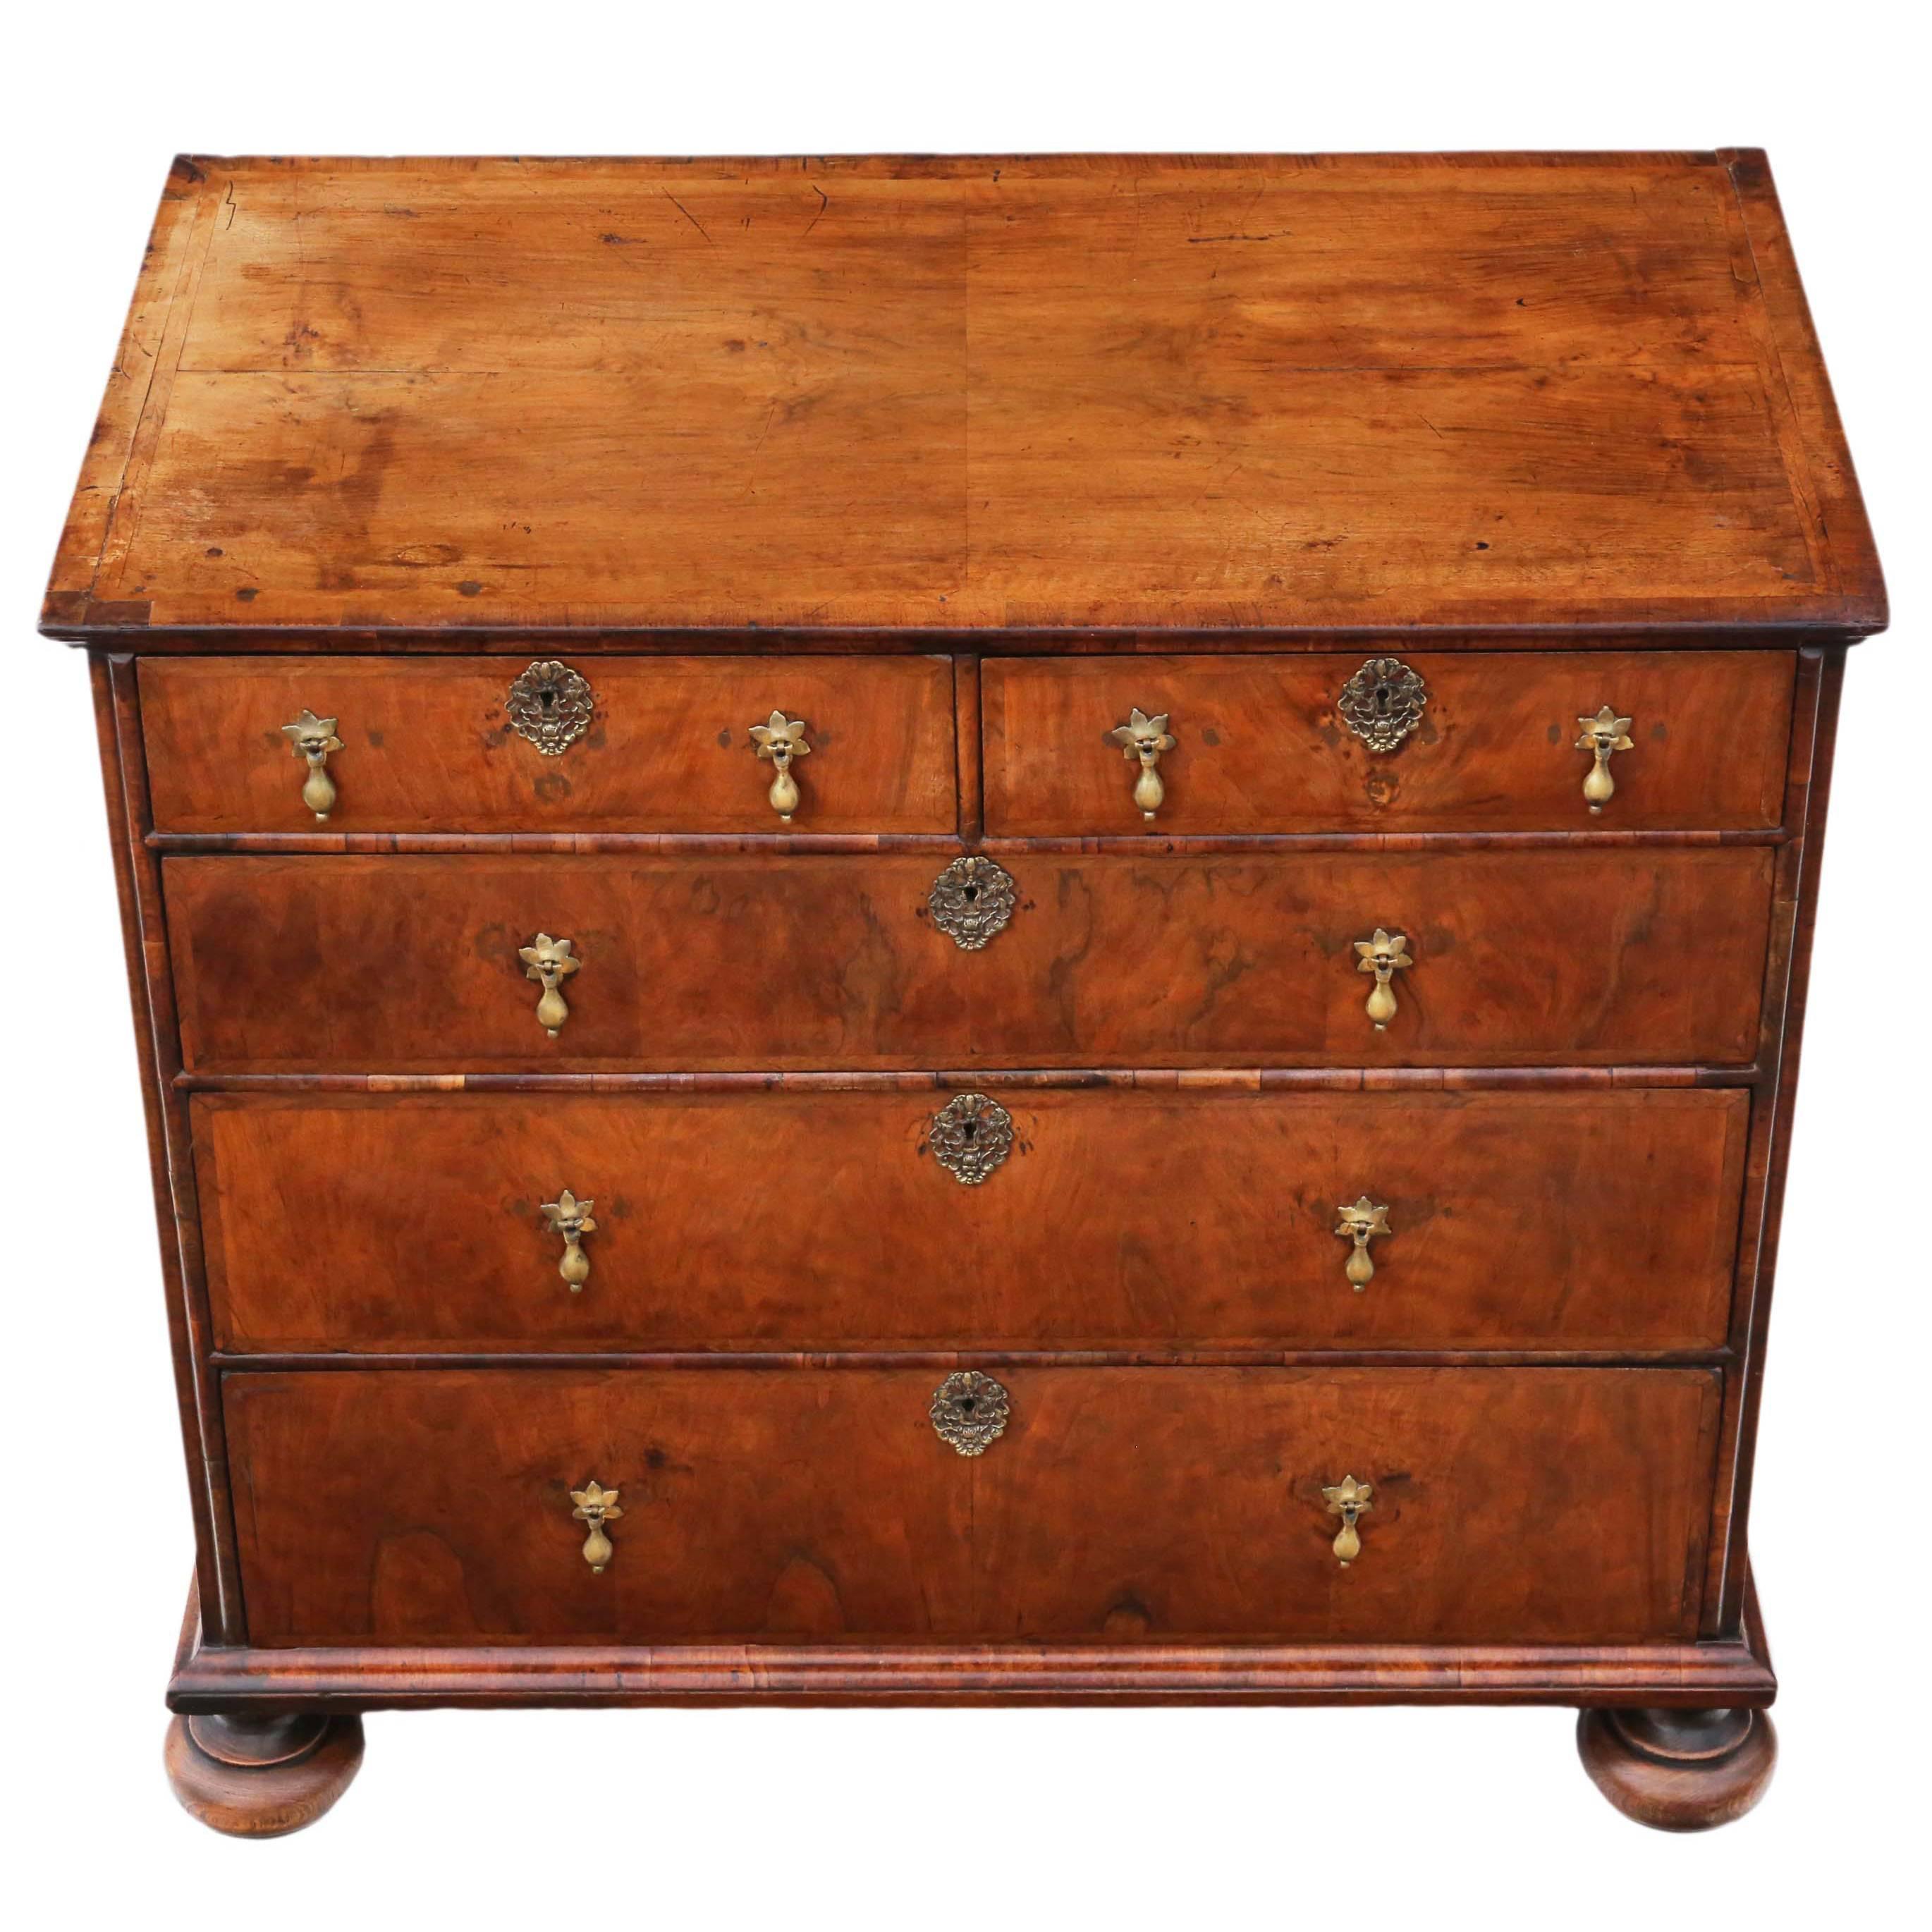 Antique Quality William & Mary circa 1690-1700 Walnut Chest Of Drawers For Sale